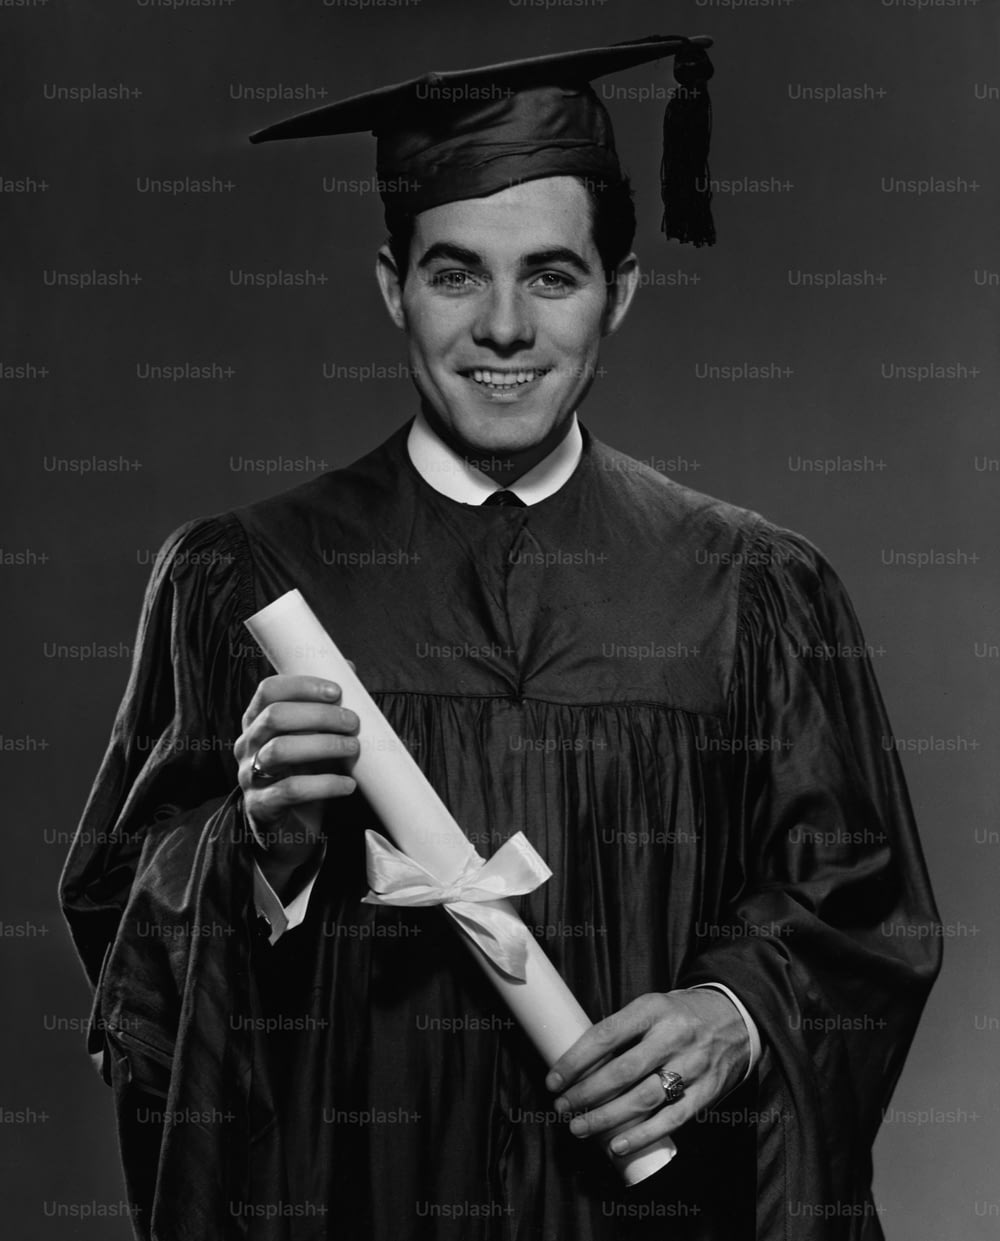 A young man in his graduation gown and mortarboard, holding his diploma, circa 1960. (Photo by George Marks/Retrofile/Getty Images)